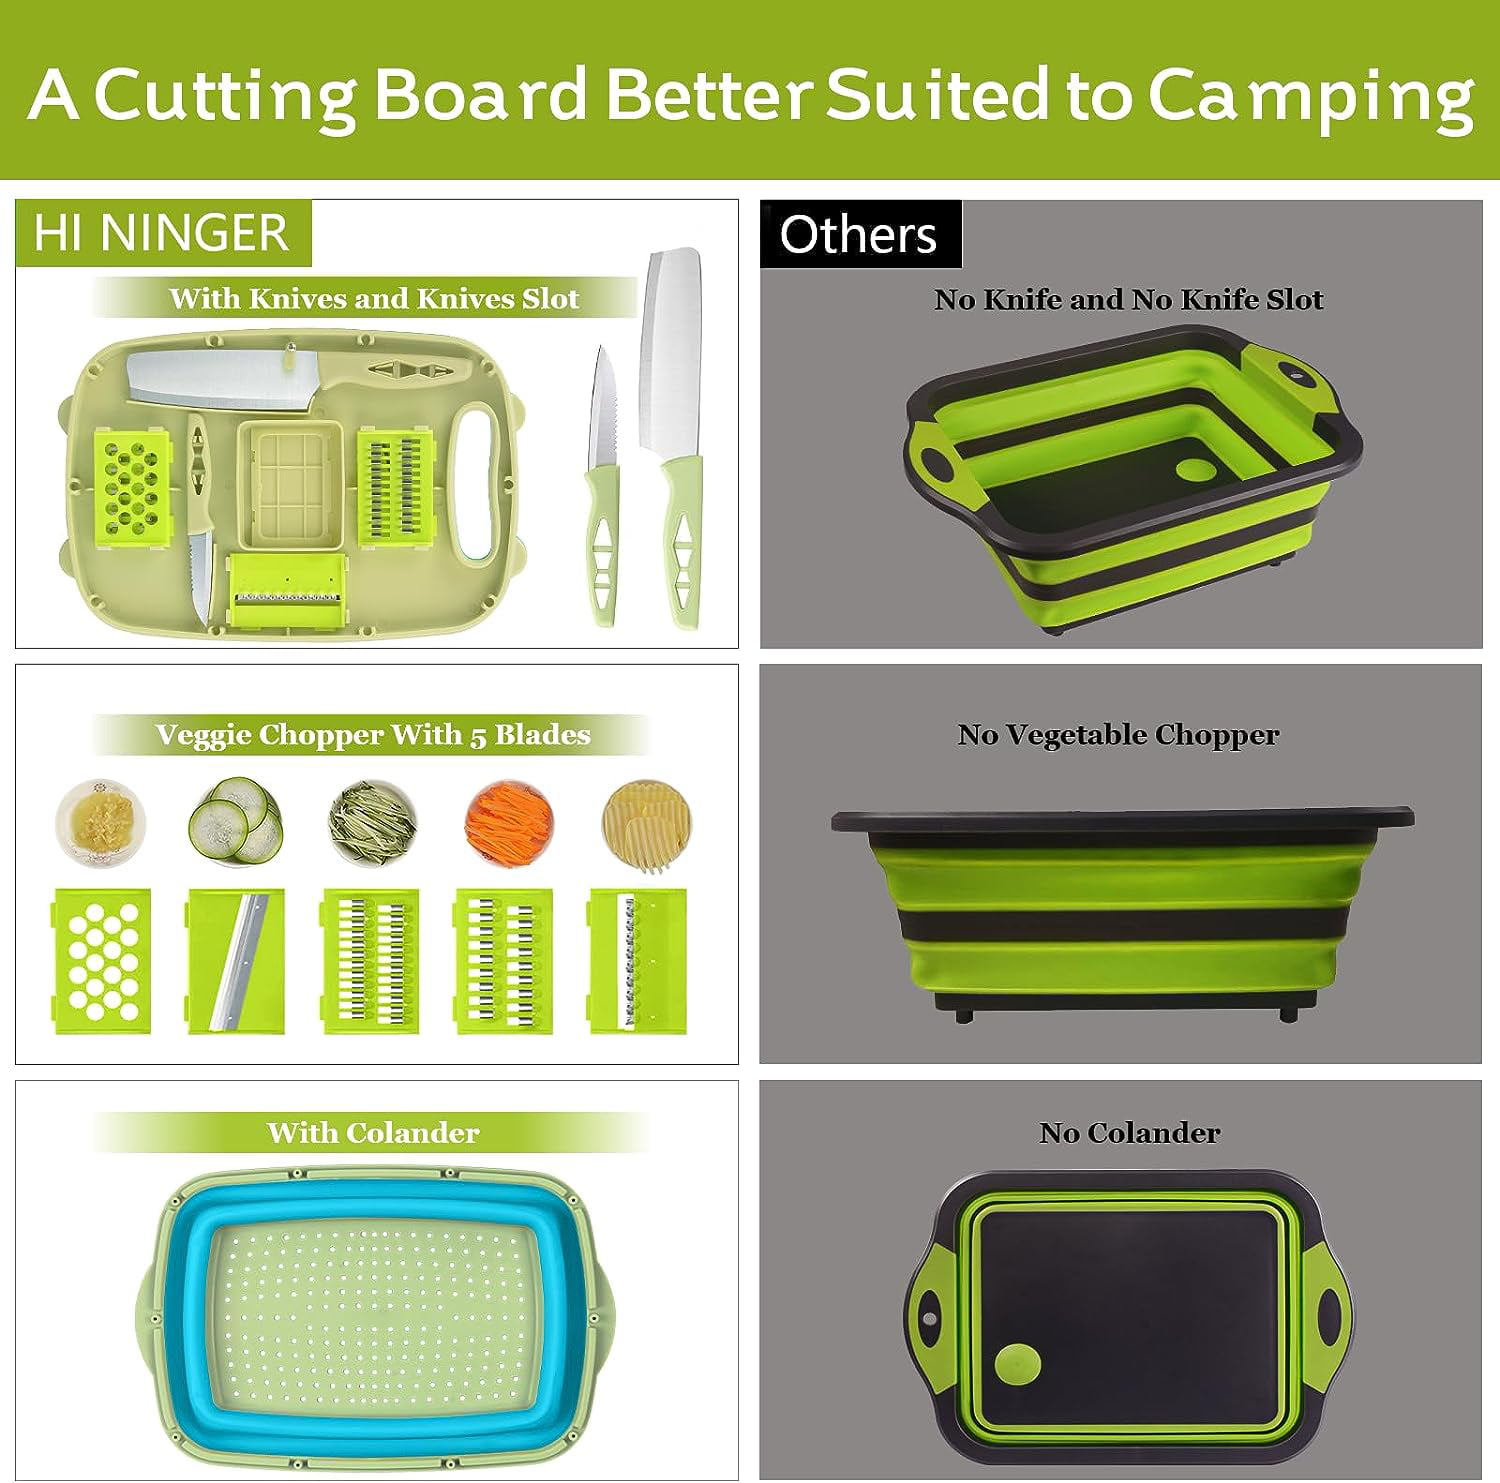 Camping Cutting Board, 9-in-1 Collapsible Chopping Board with Colander,Camping Gifts for Campers Happy Camper,Camping Accessories for RV Campers (Grey